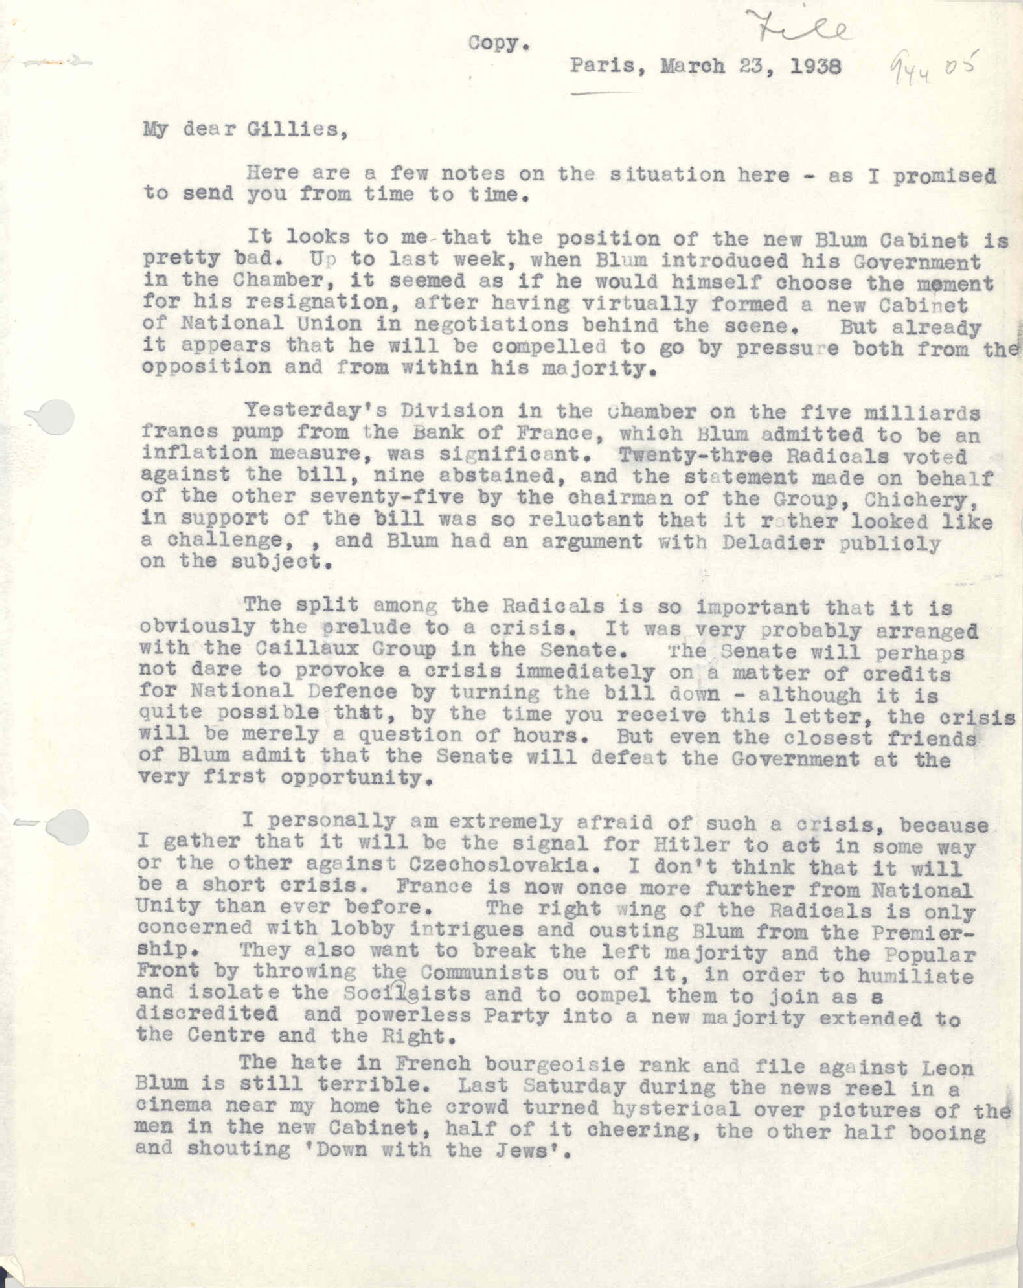 Notes on the political situation, 23 March 1938